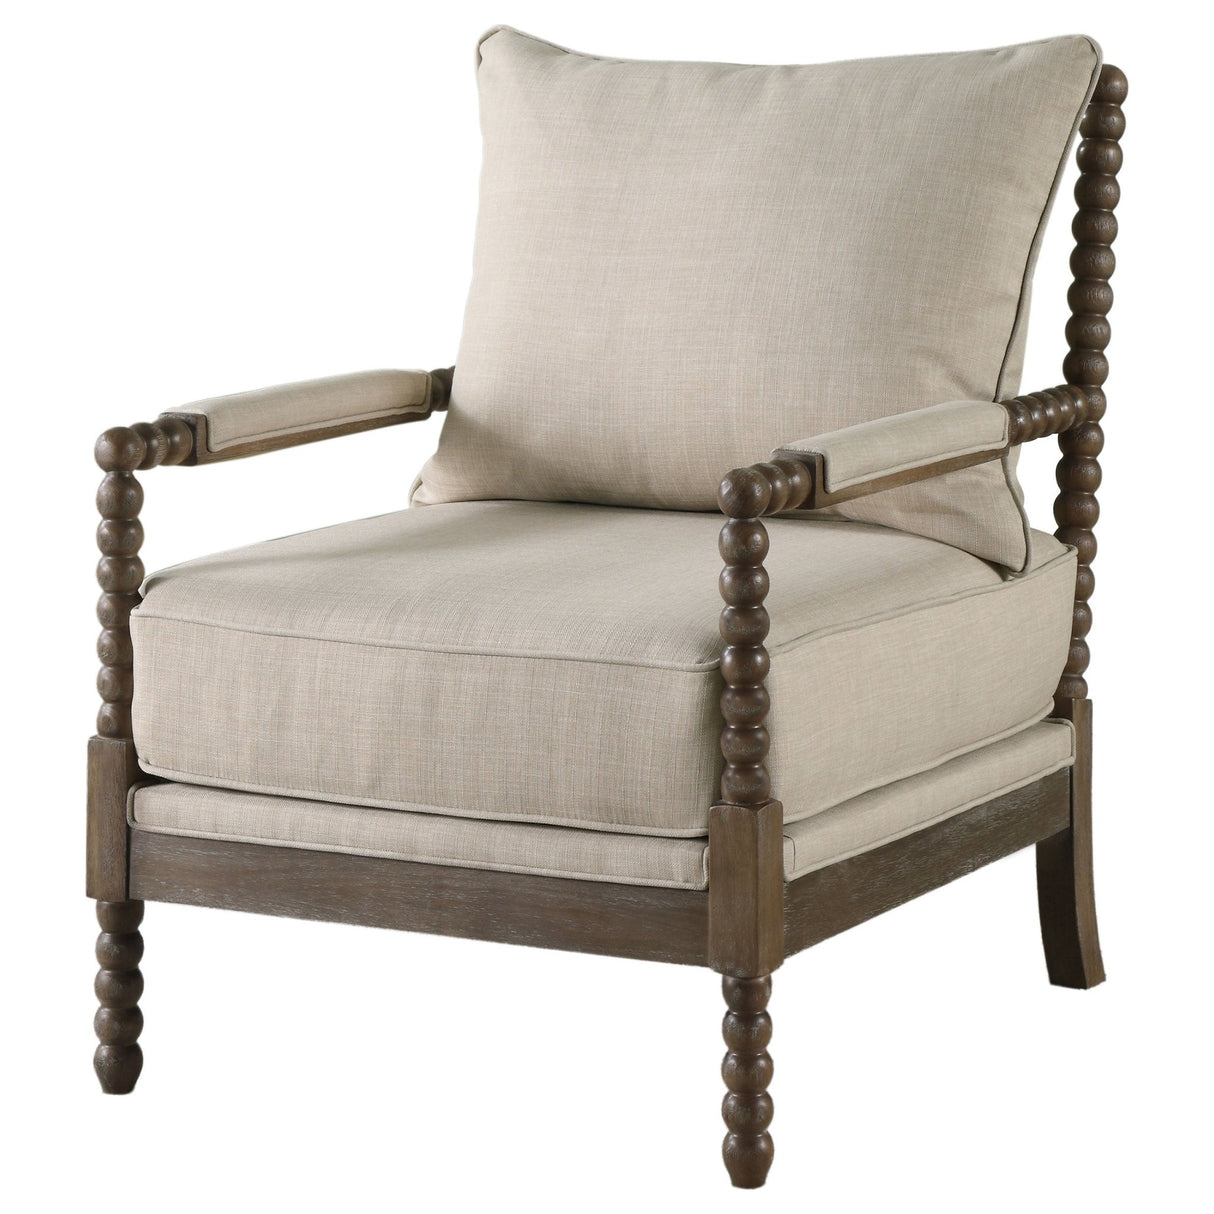 Accent Chair - Blanchett Cushion Back Accent Chair Beige and Natural - Accent Chairs - 905362 - image - 4